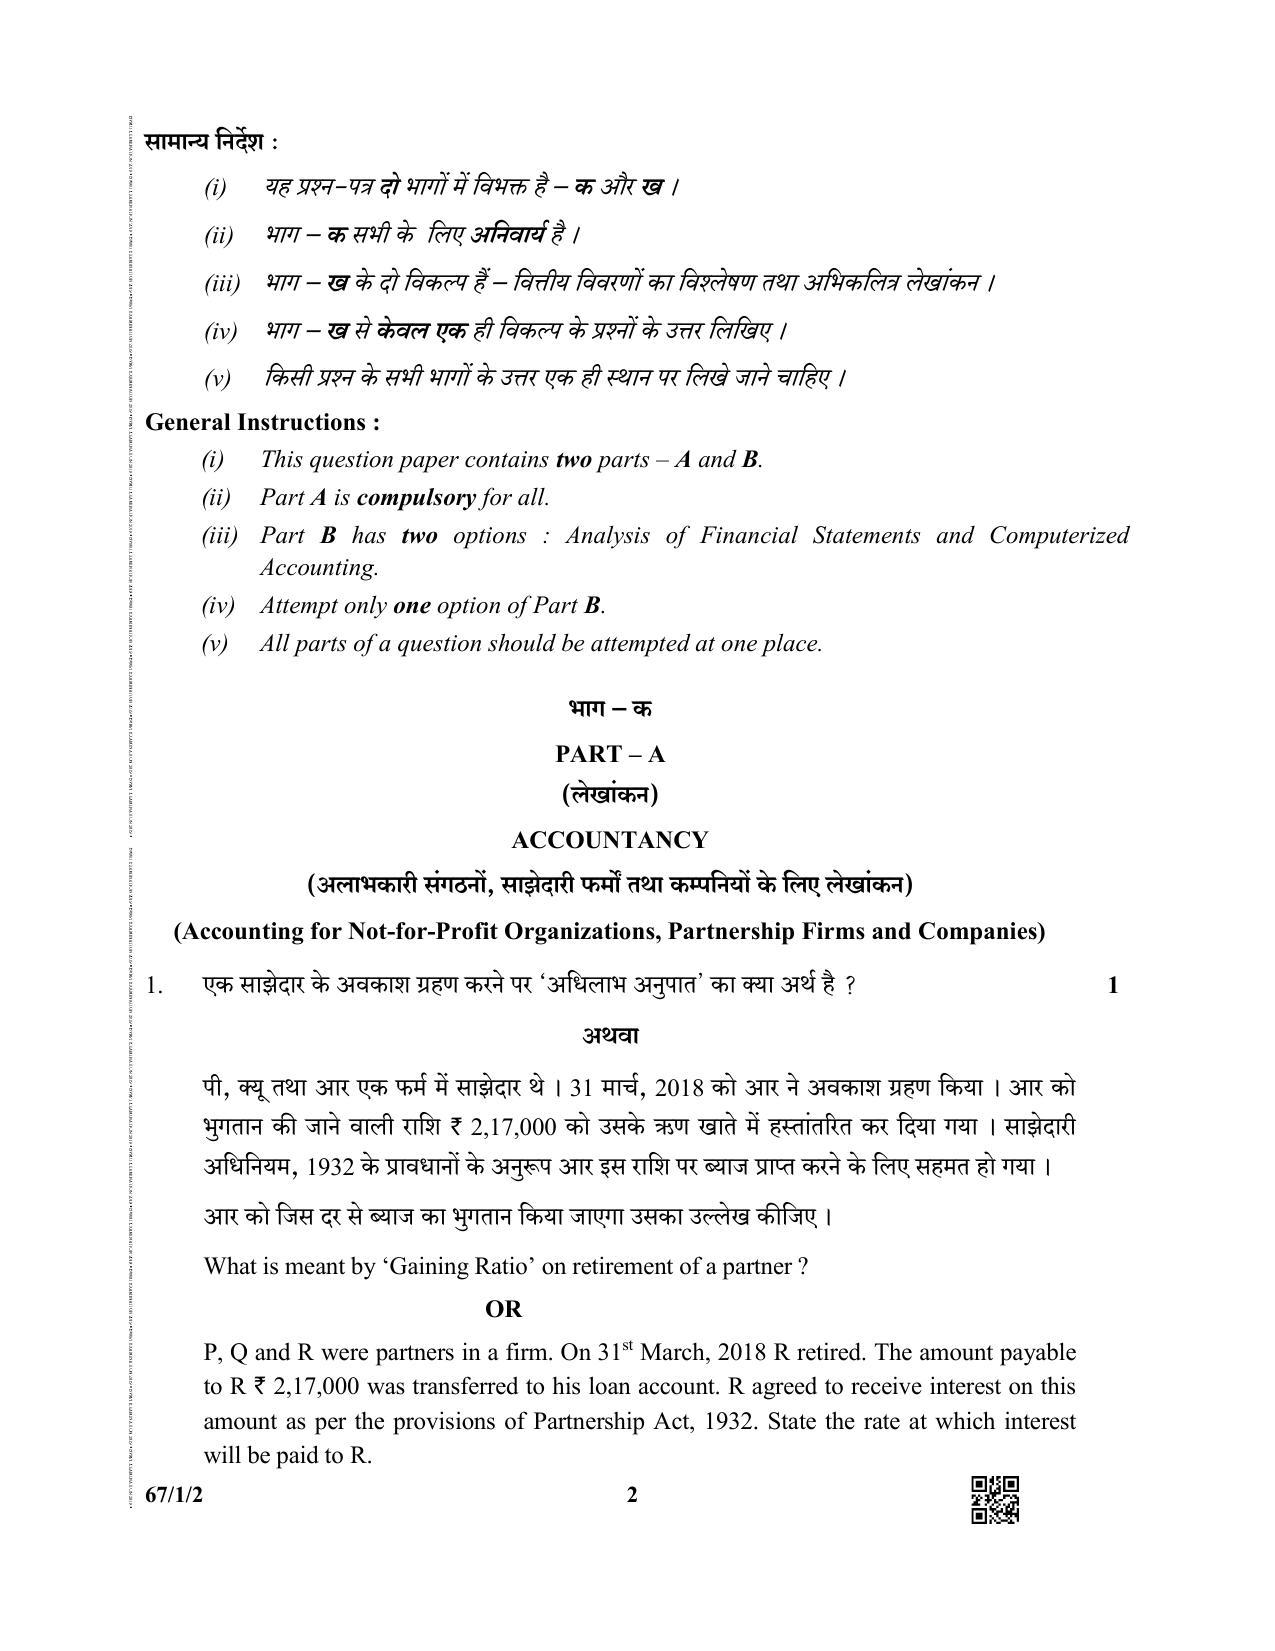 CBSE Class 12 67-1-2  (Accountancy) 2019 Question Paper - Page 2